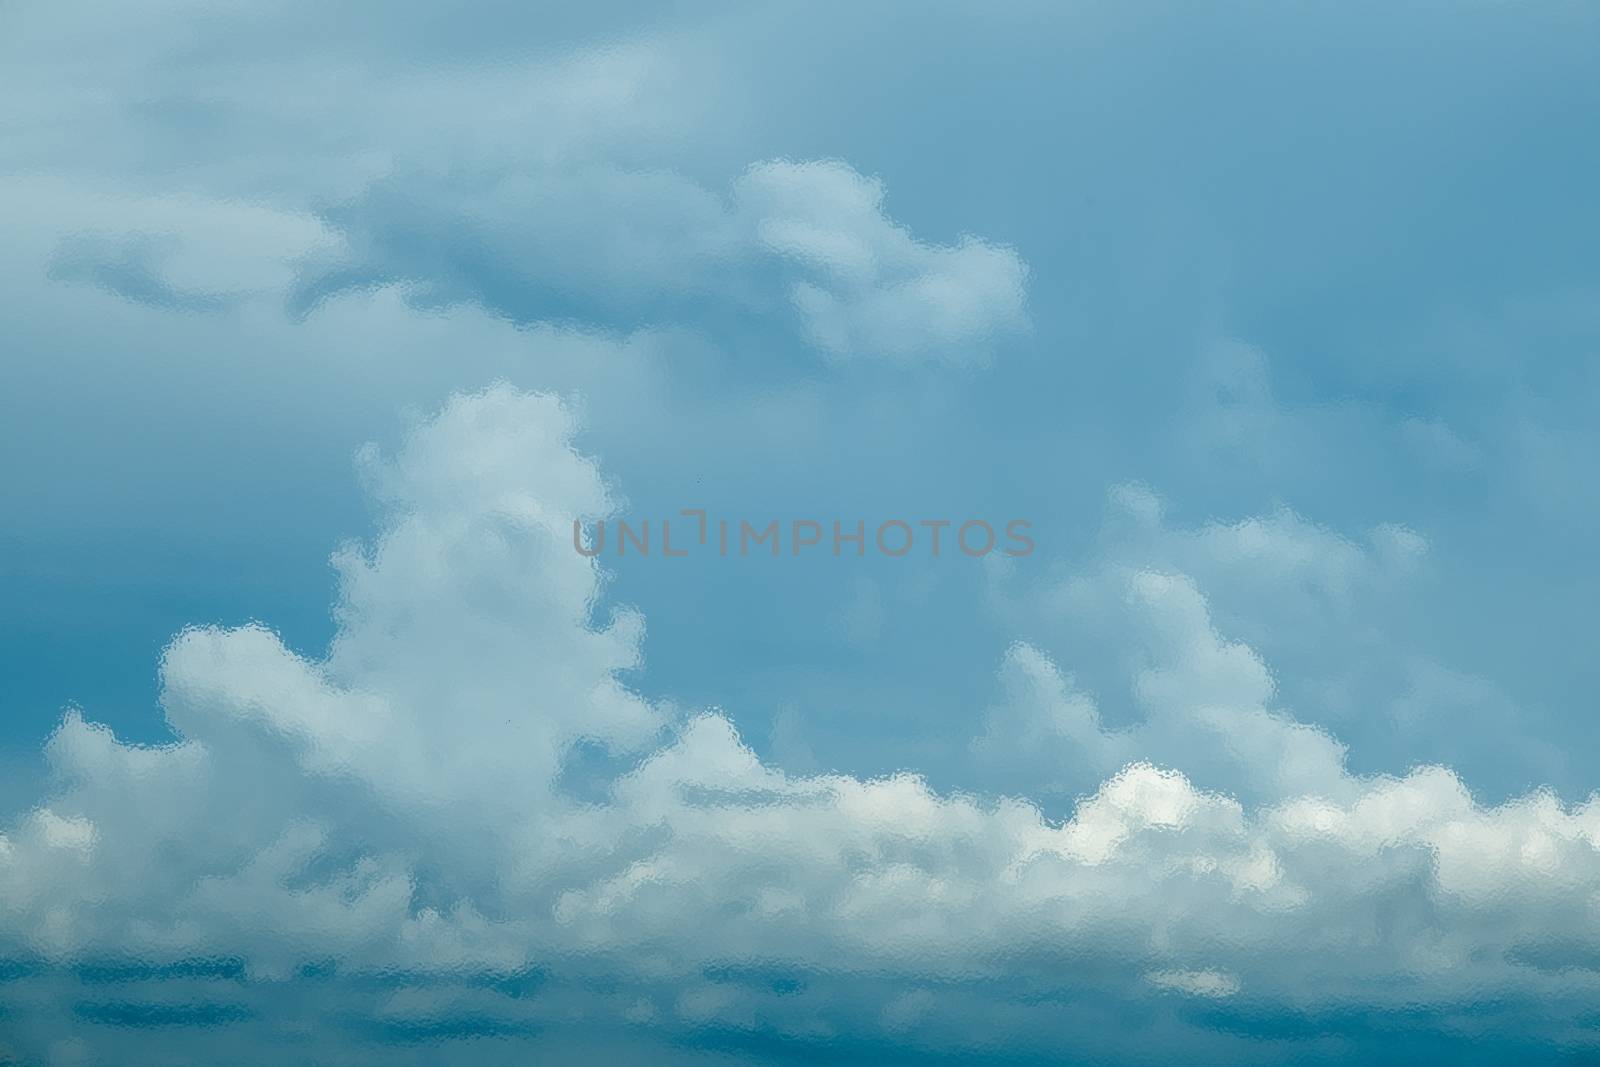 The Blue sky with white cloud frosted glass texture as background.